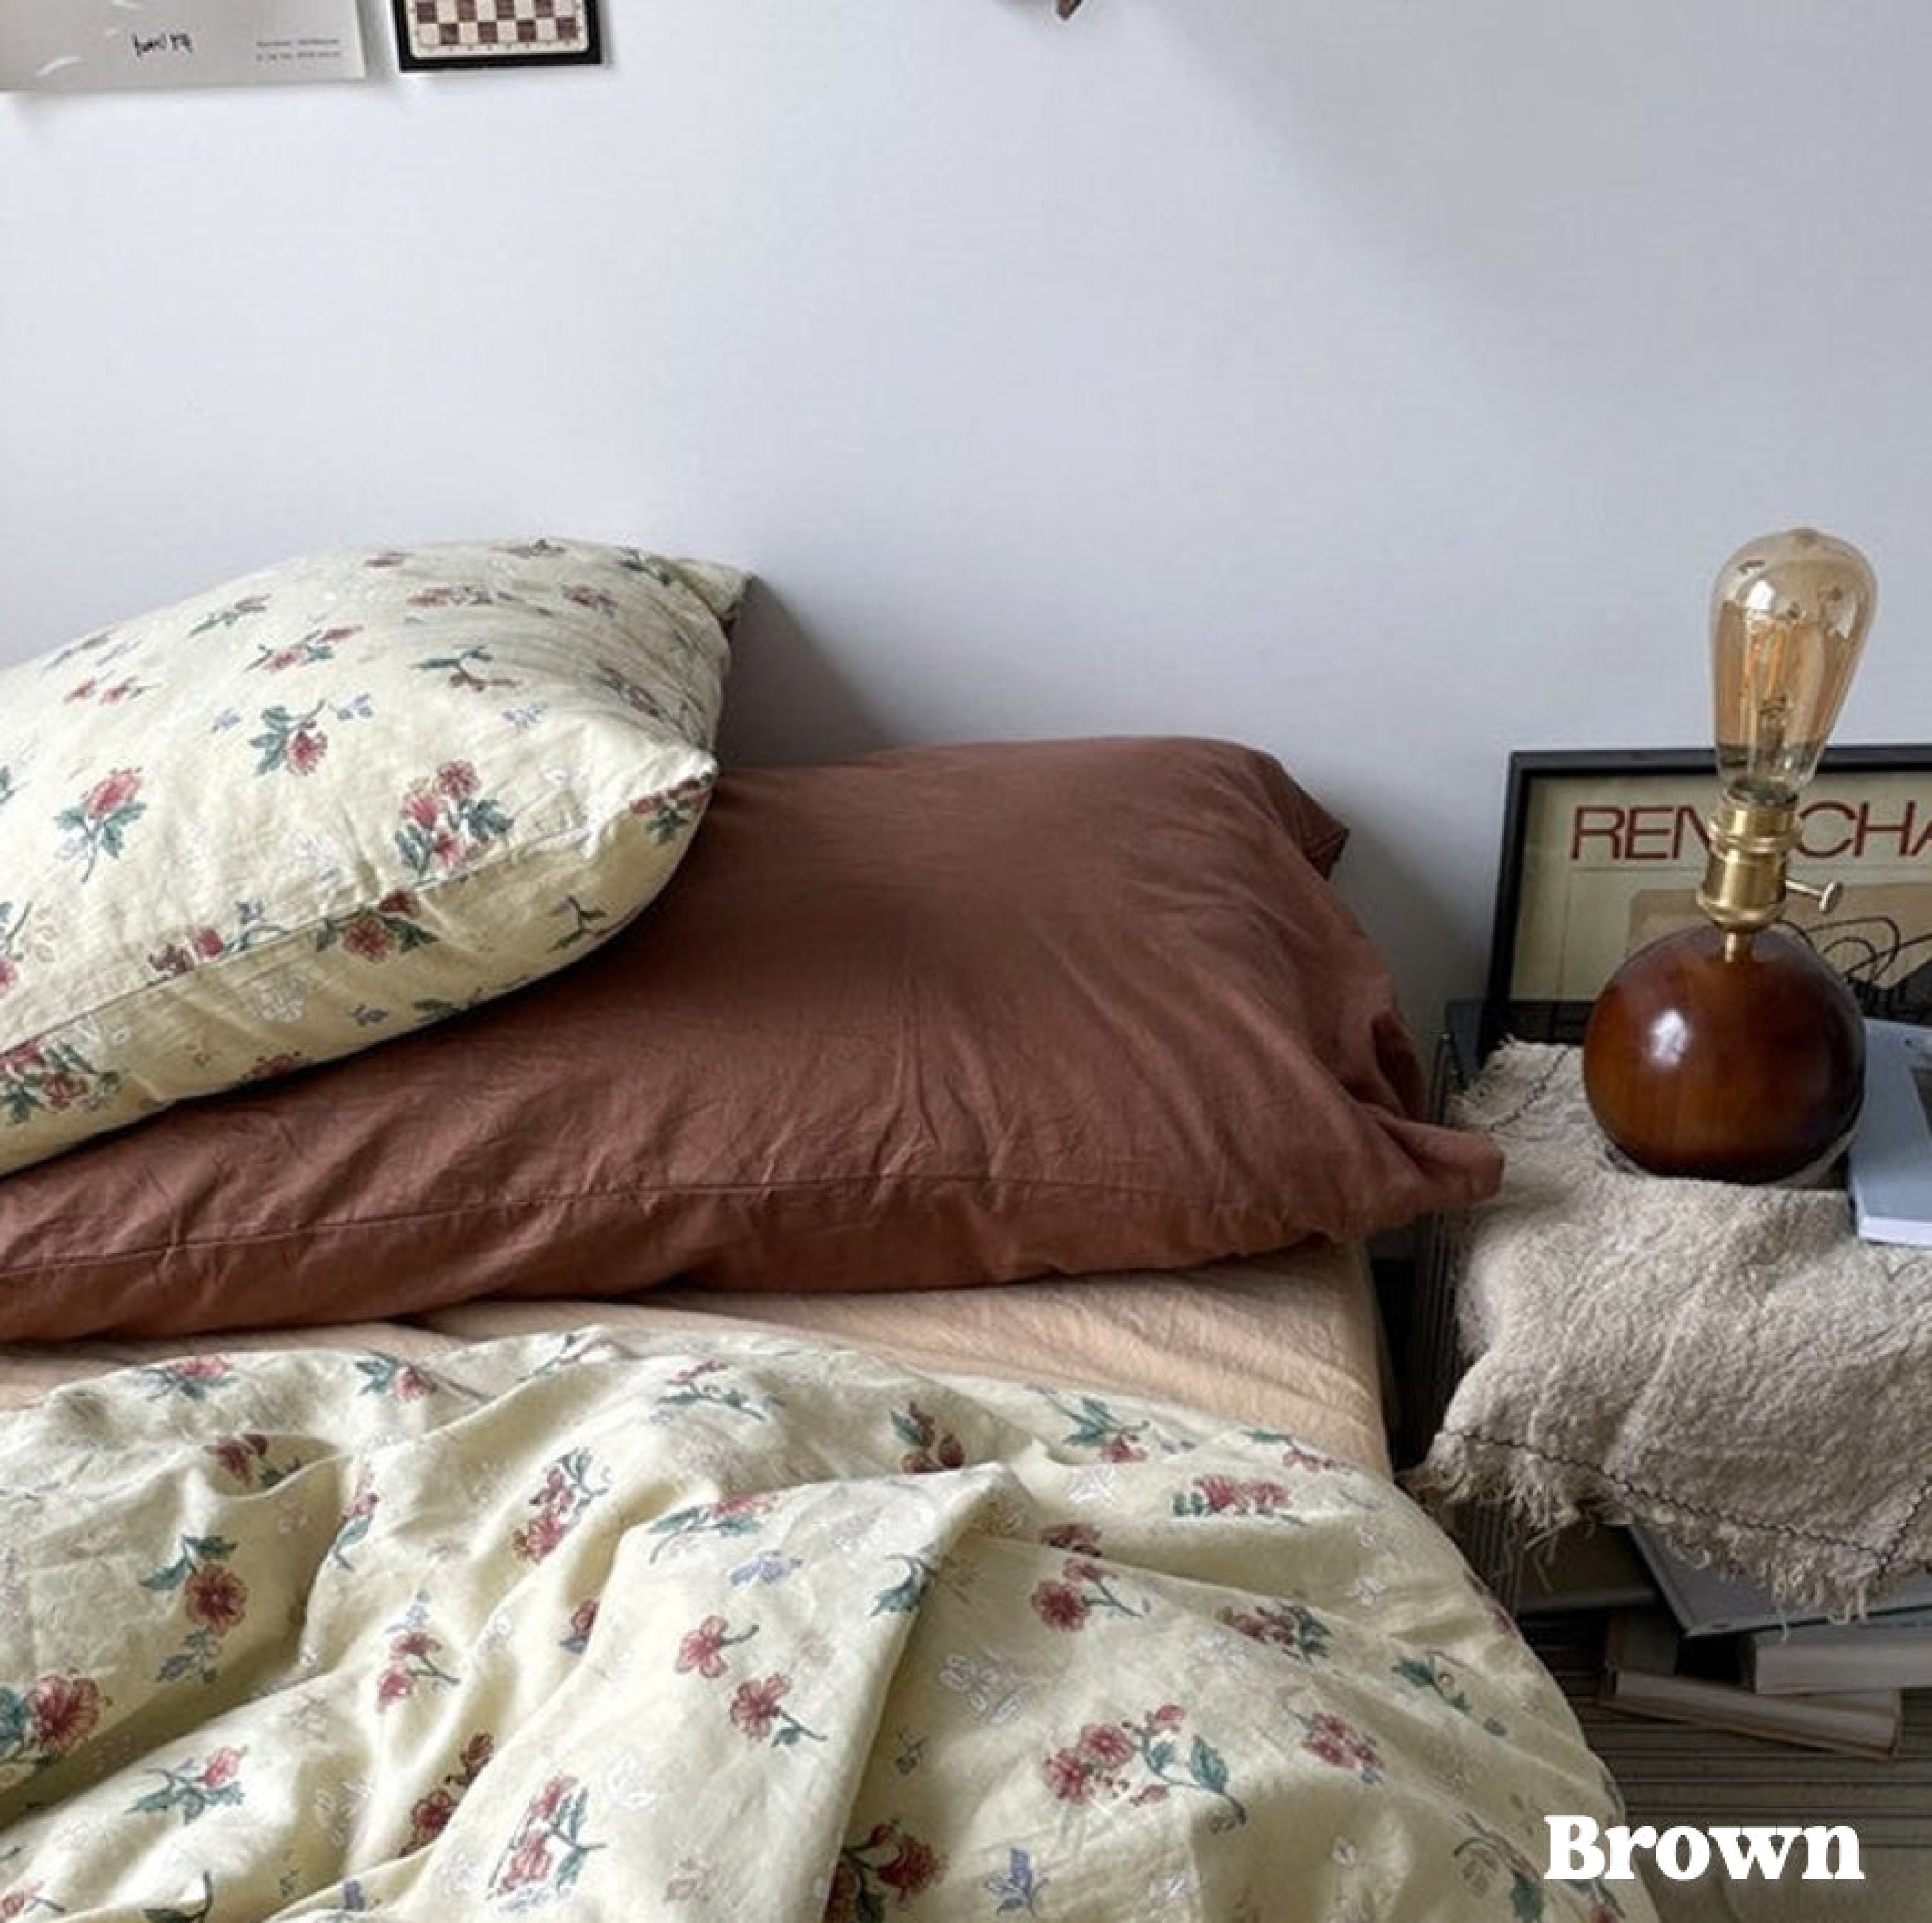 https://cdn.shopify.com/s/files/1/0525/8756/1126/files/assorted-washed-cotton-pillowcases-floral-beige-brown-pillow-cases-672.jpg?v=1696515572